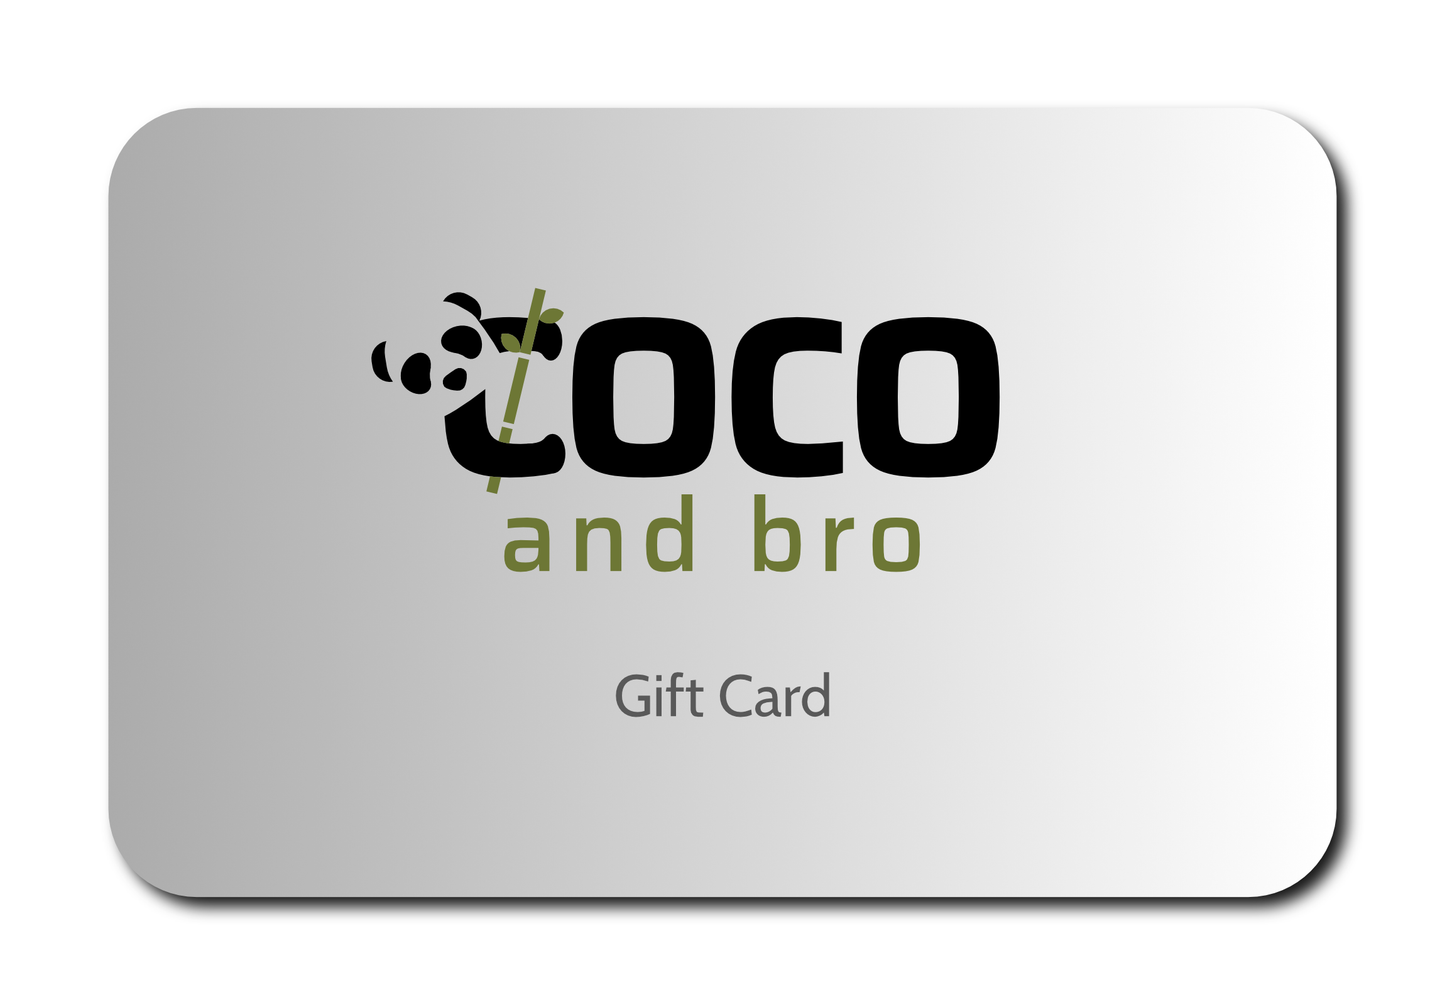 A digital gift card for the Coco and Bro website, valid on all products across the entire Coco and Bro website range.